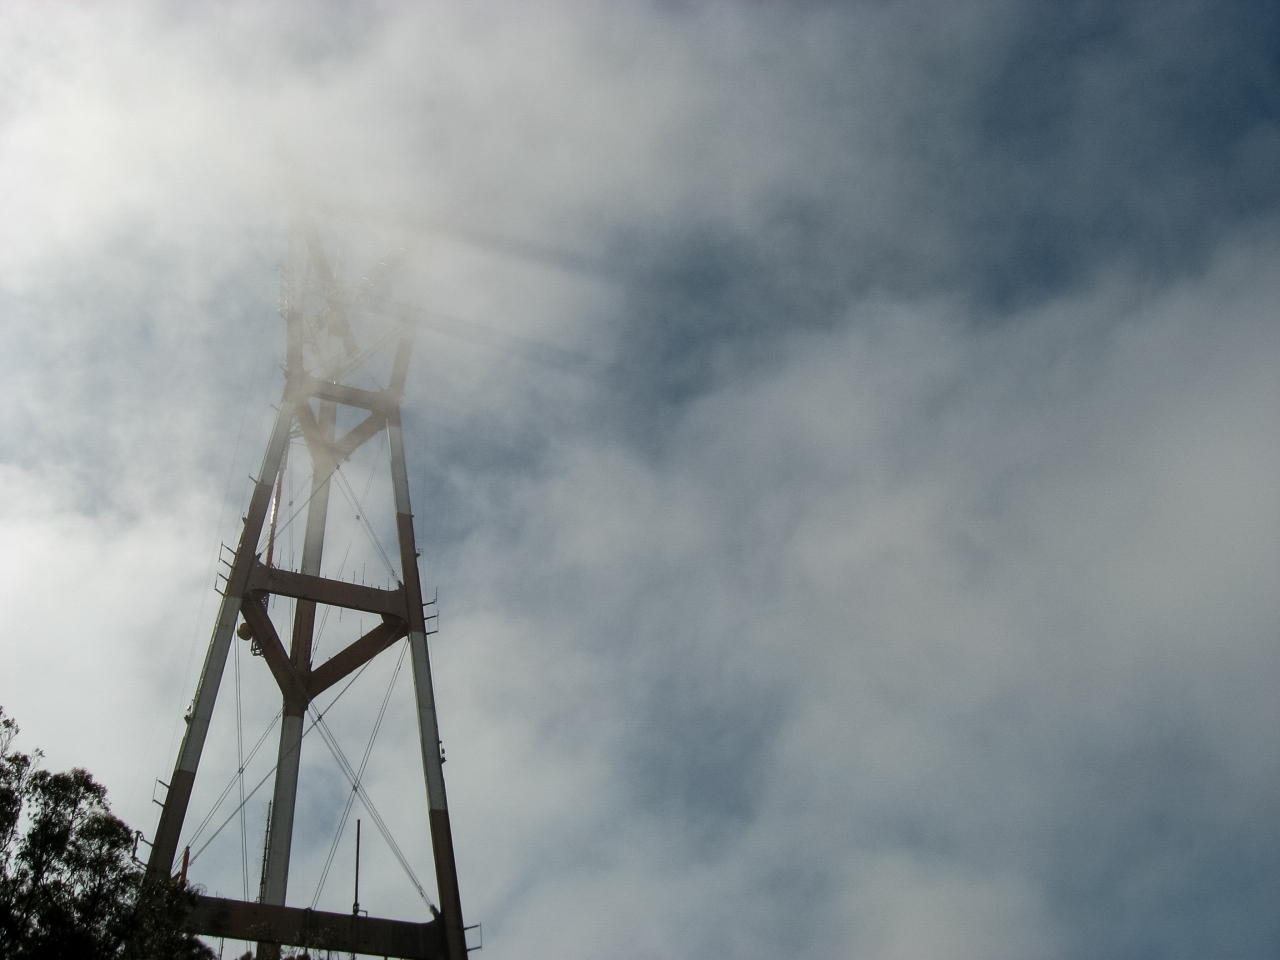 Sutro Tower casting shadows in the fog as seen from the neighborhood below.